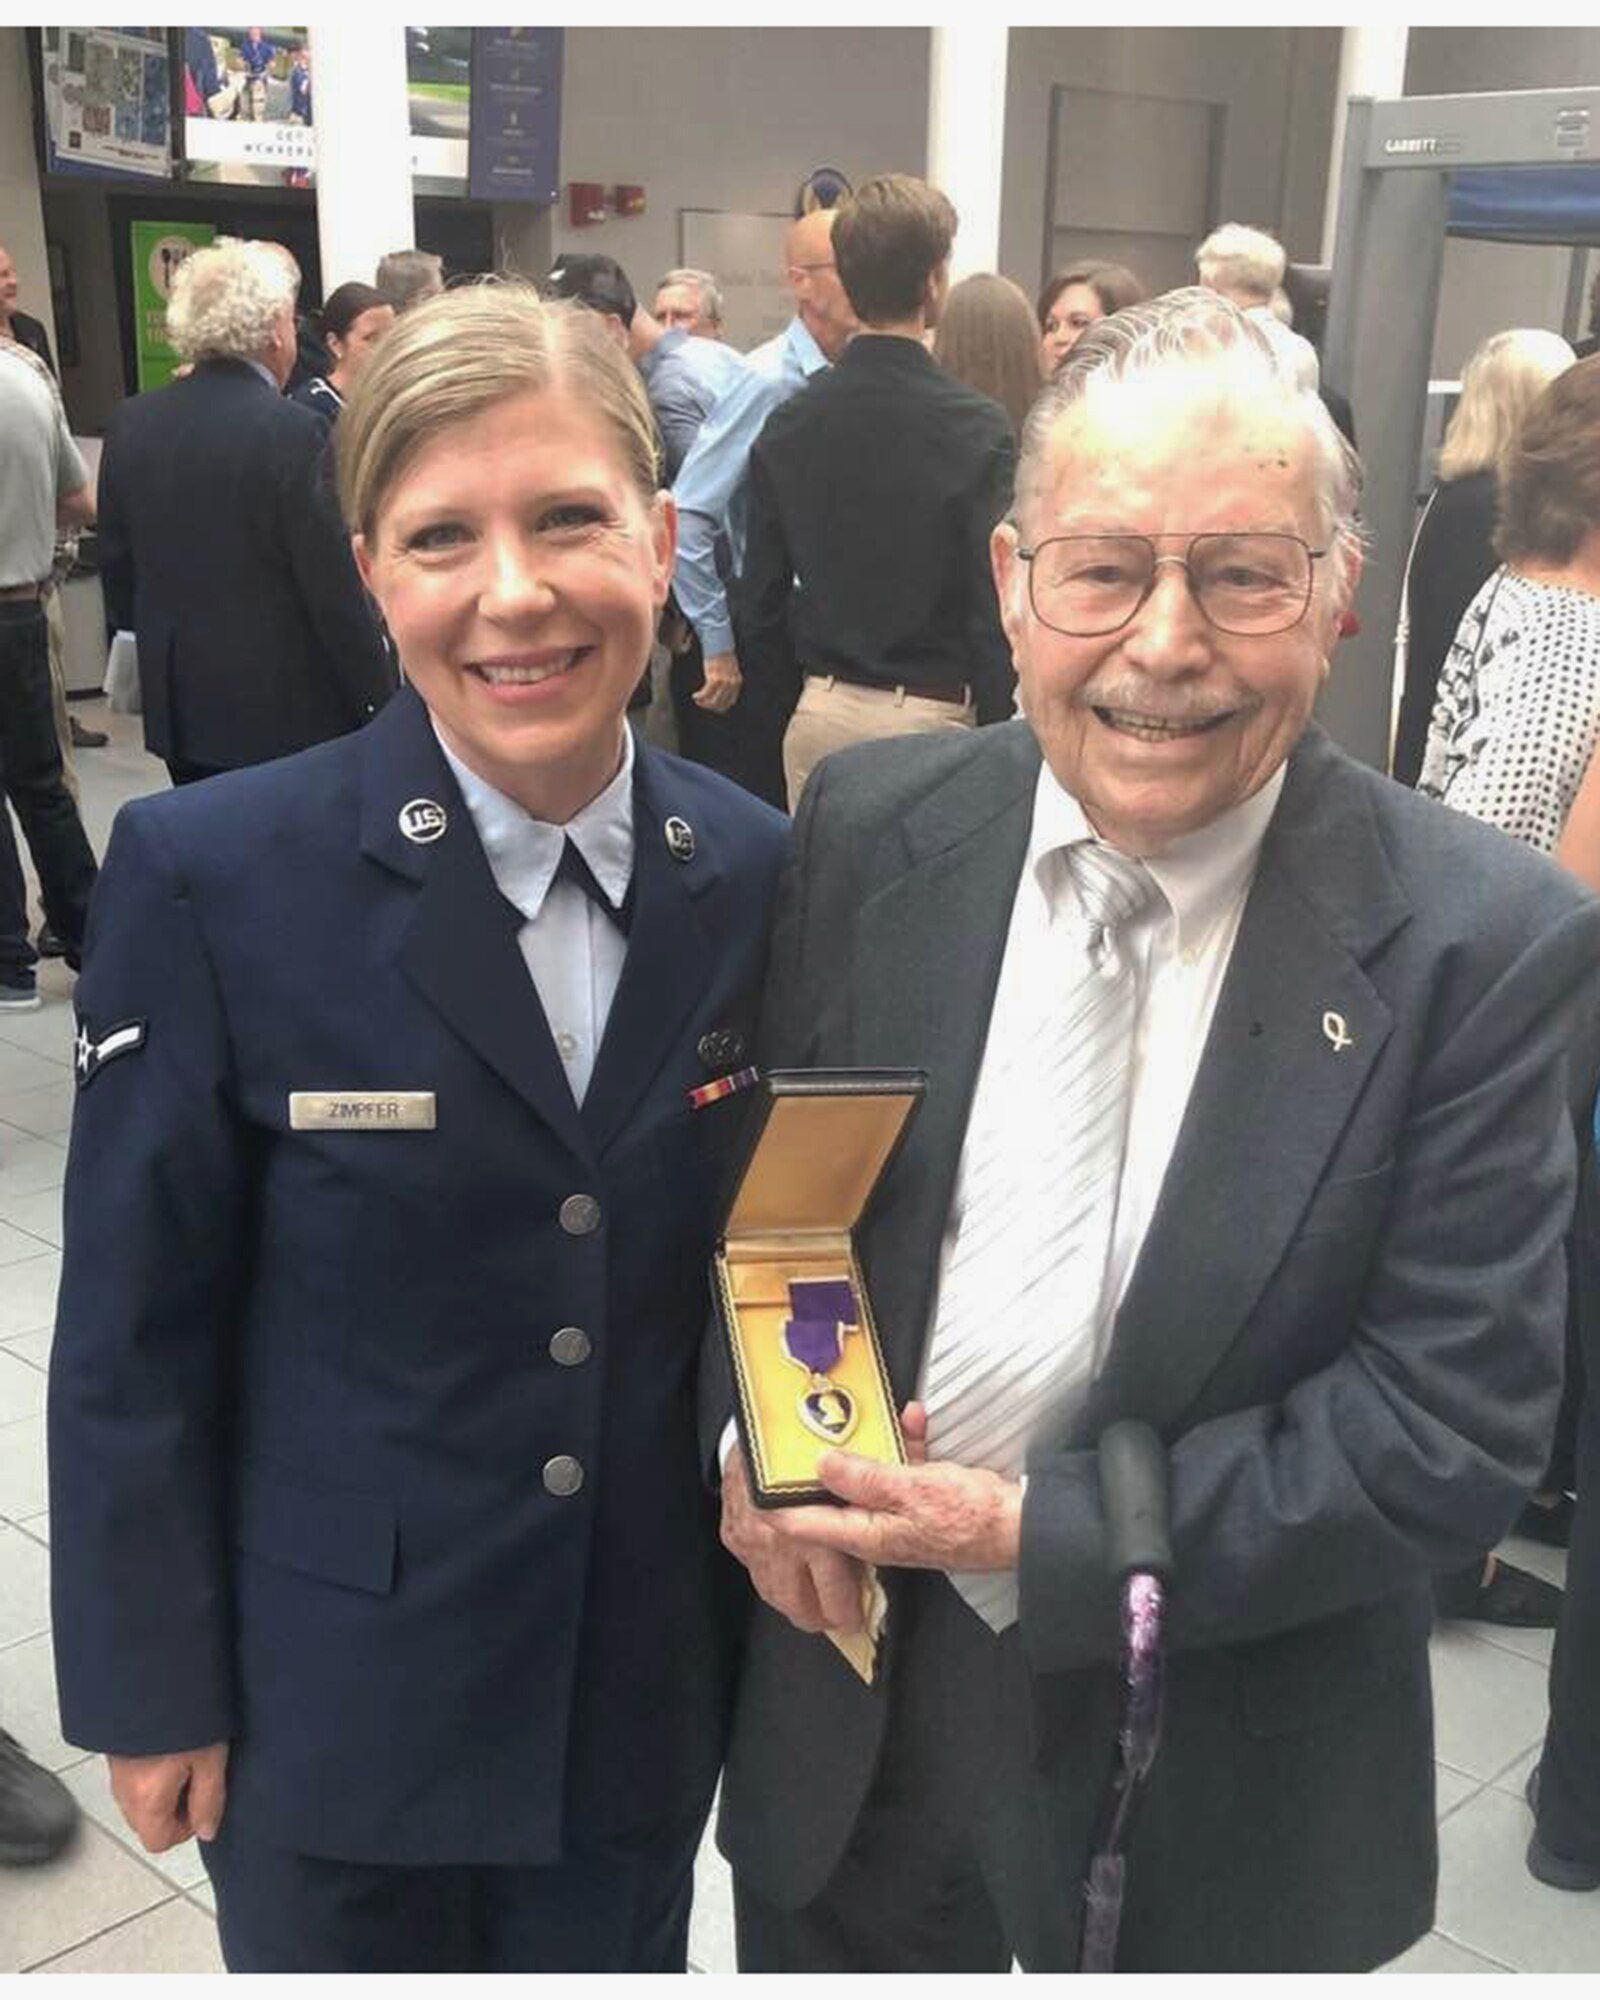 Airman Erin Zimpfer, 445th Airlift Wing Public Affairs, poses with Army veteran Albert Carr, during the Ford Oval of Honor held at the National Museum of the U.S. Air Force June 20, 2019. Mr. Carr received two Purple Hearts during his military career for his meritorious service during the second Great War.